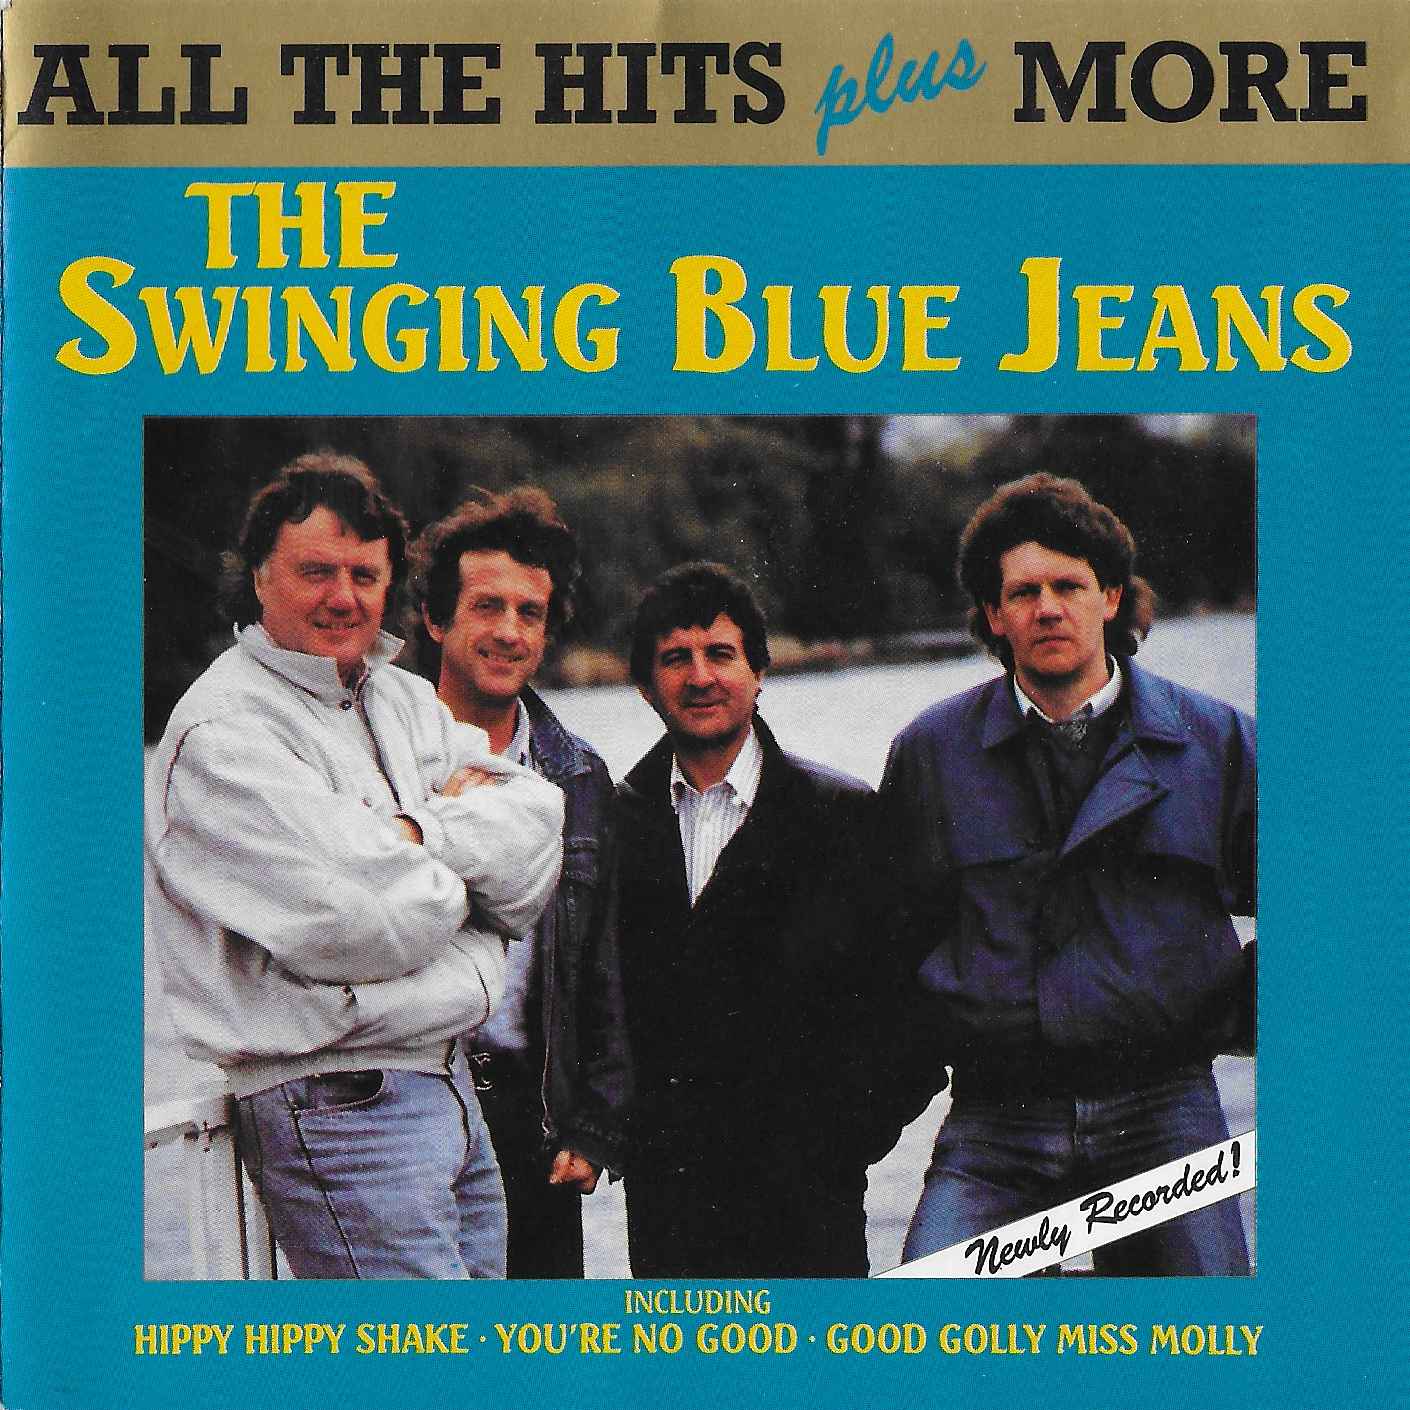 Picture of All the hits plus more by artist Swinging Blue Jeans from the BBC cds - Records and Tapes library